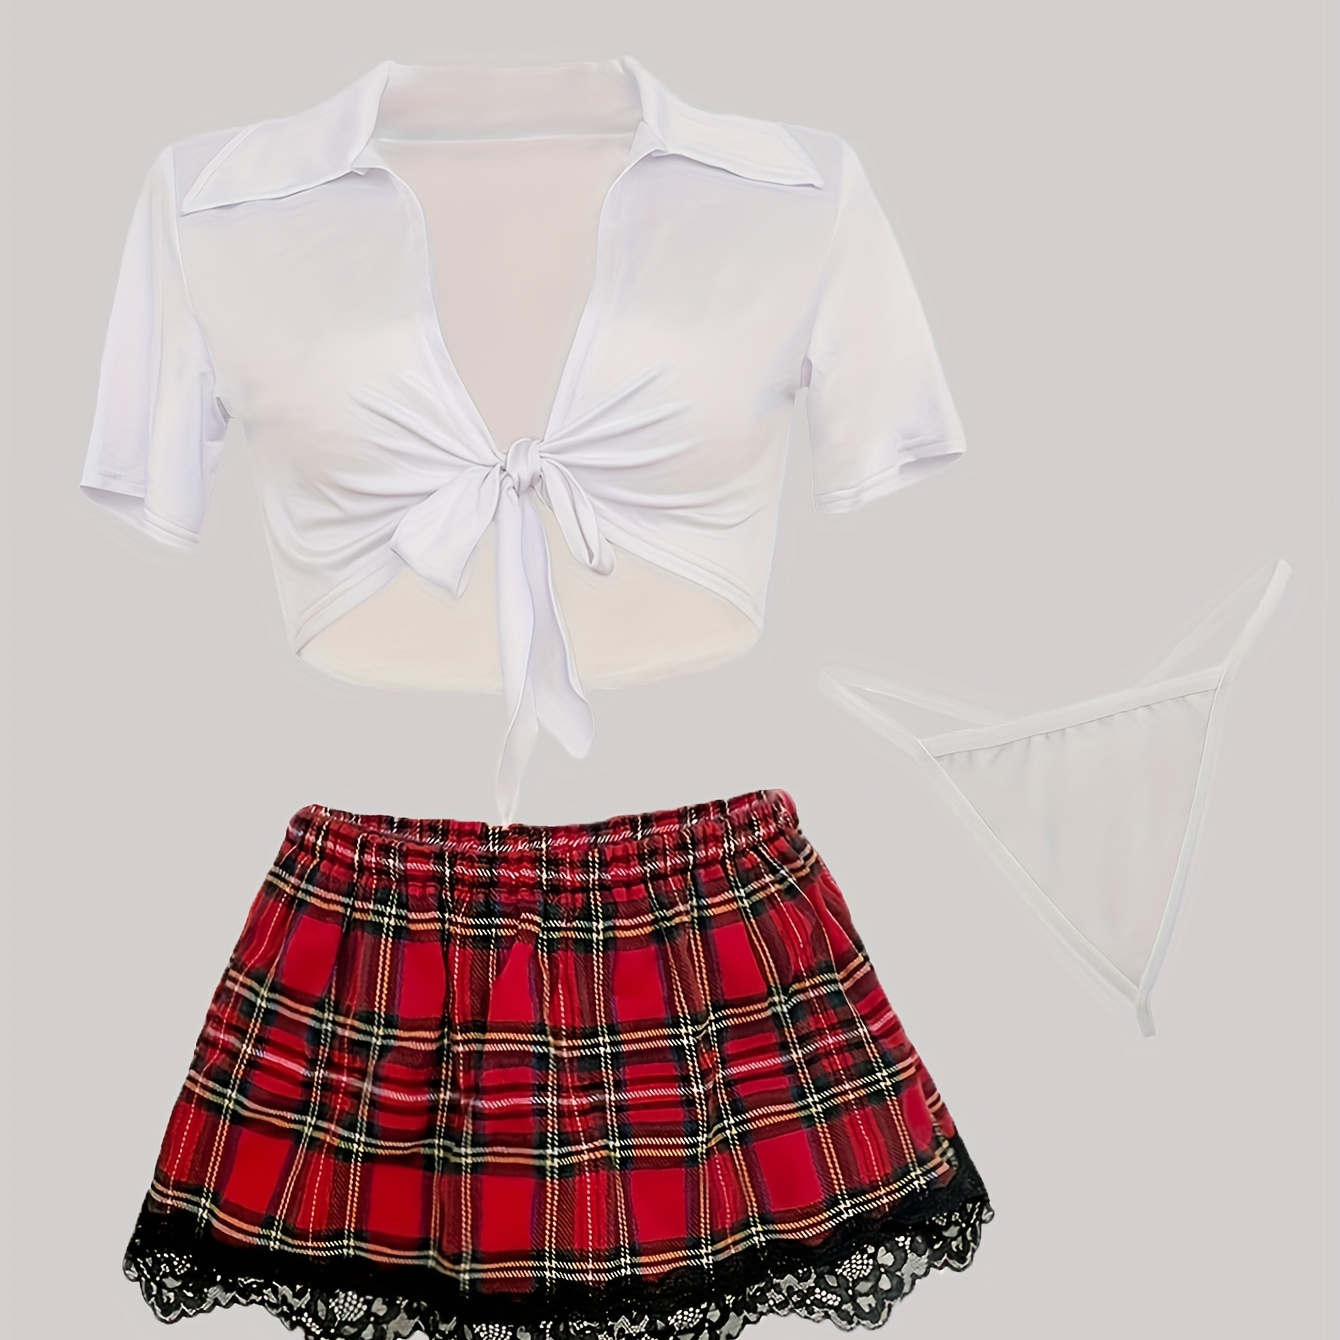 

Naughty Uniform Role Play Costumes, Plaid Skirt Knot Front Short Sleeves Intimates Top & V String Thong & Plaid Lace Skirt 3-piece Set, Women's Sexy Lingerie & Underwear